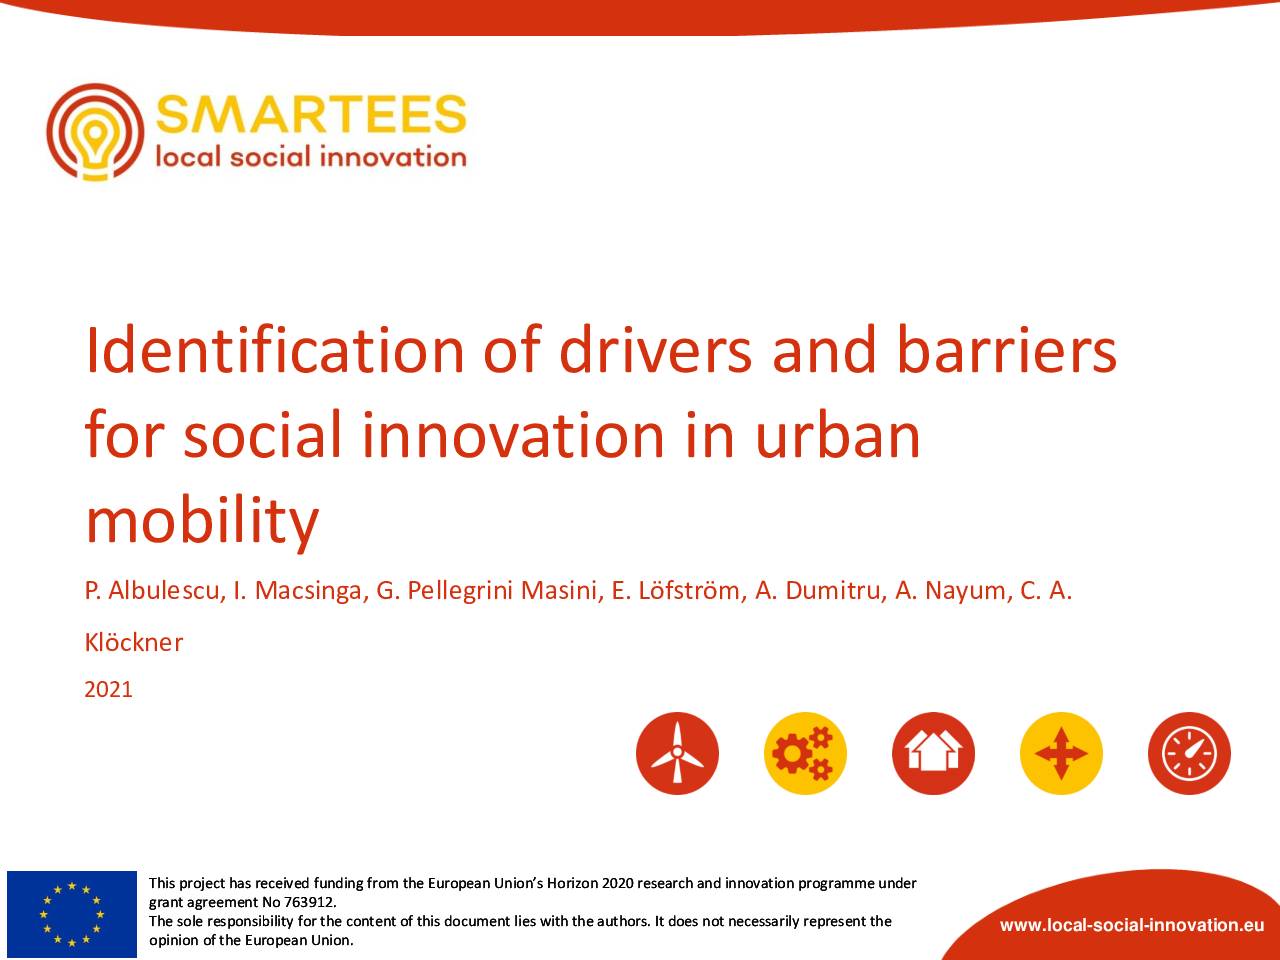 Identification of drivers and barriers for social innovation in urban mobility